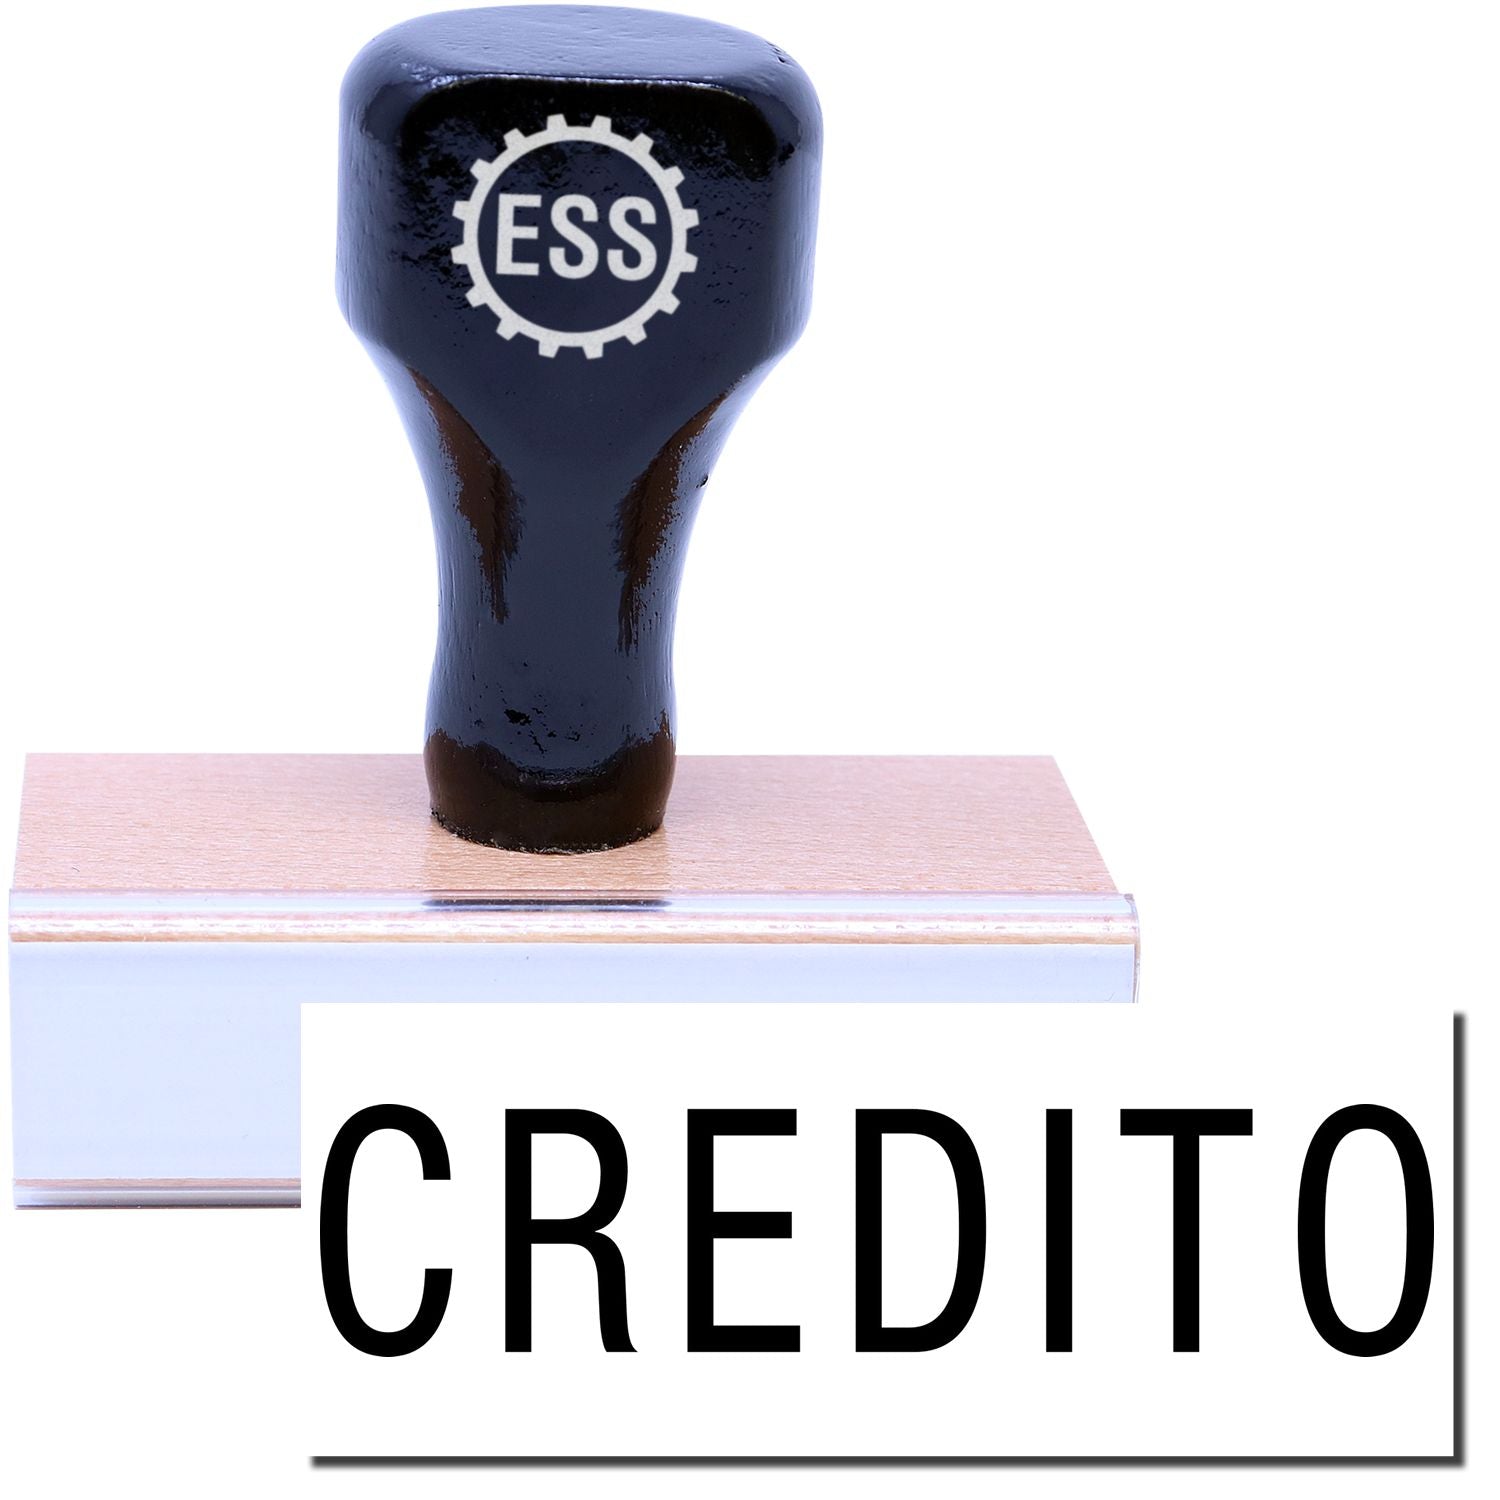 A stock office rubber stamp with a stamped image showing how the text "CREDITO" is displayed after stamping.